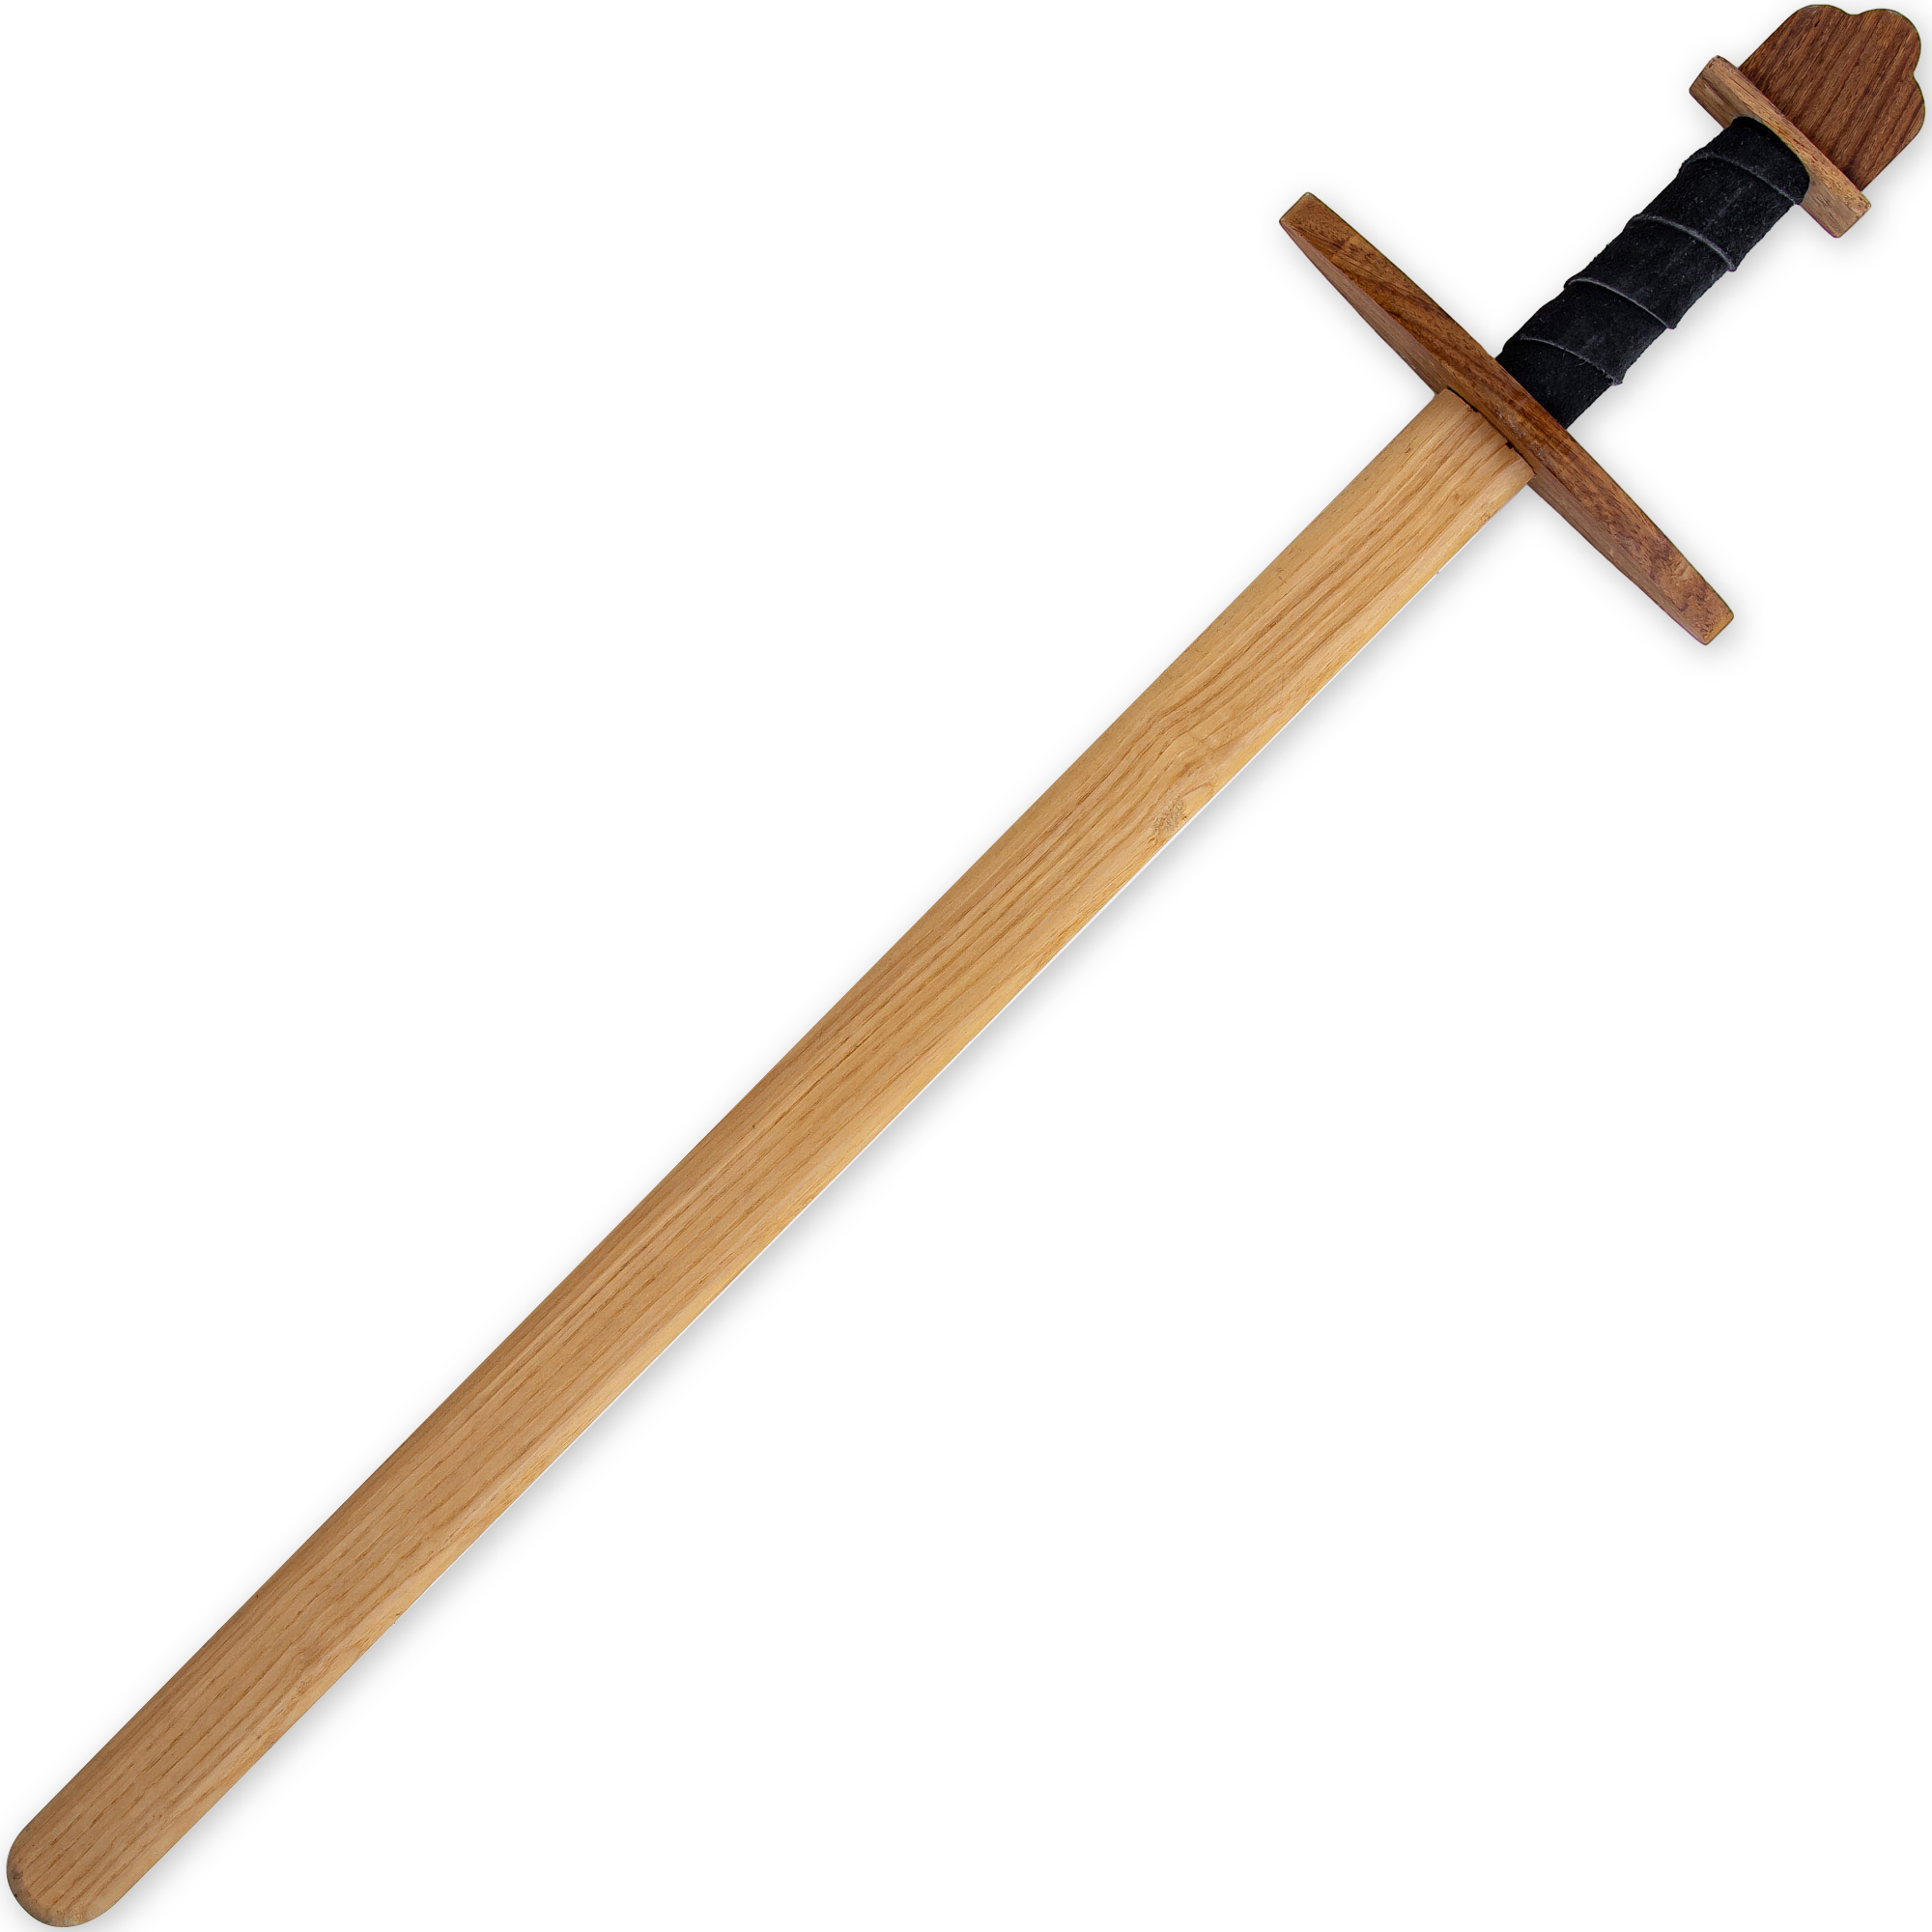 Wooden Replica Viking Practice SWORD | Steamed Beech Wood w/ Leather Wrapped Handle | Black Leather